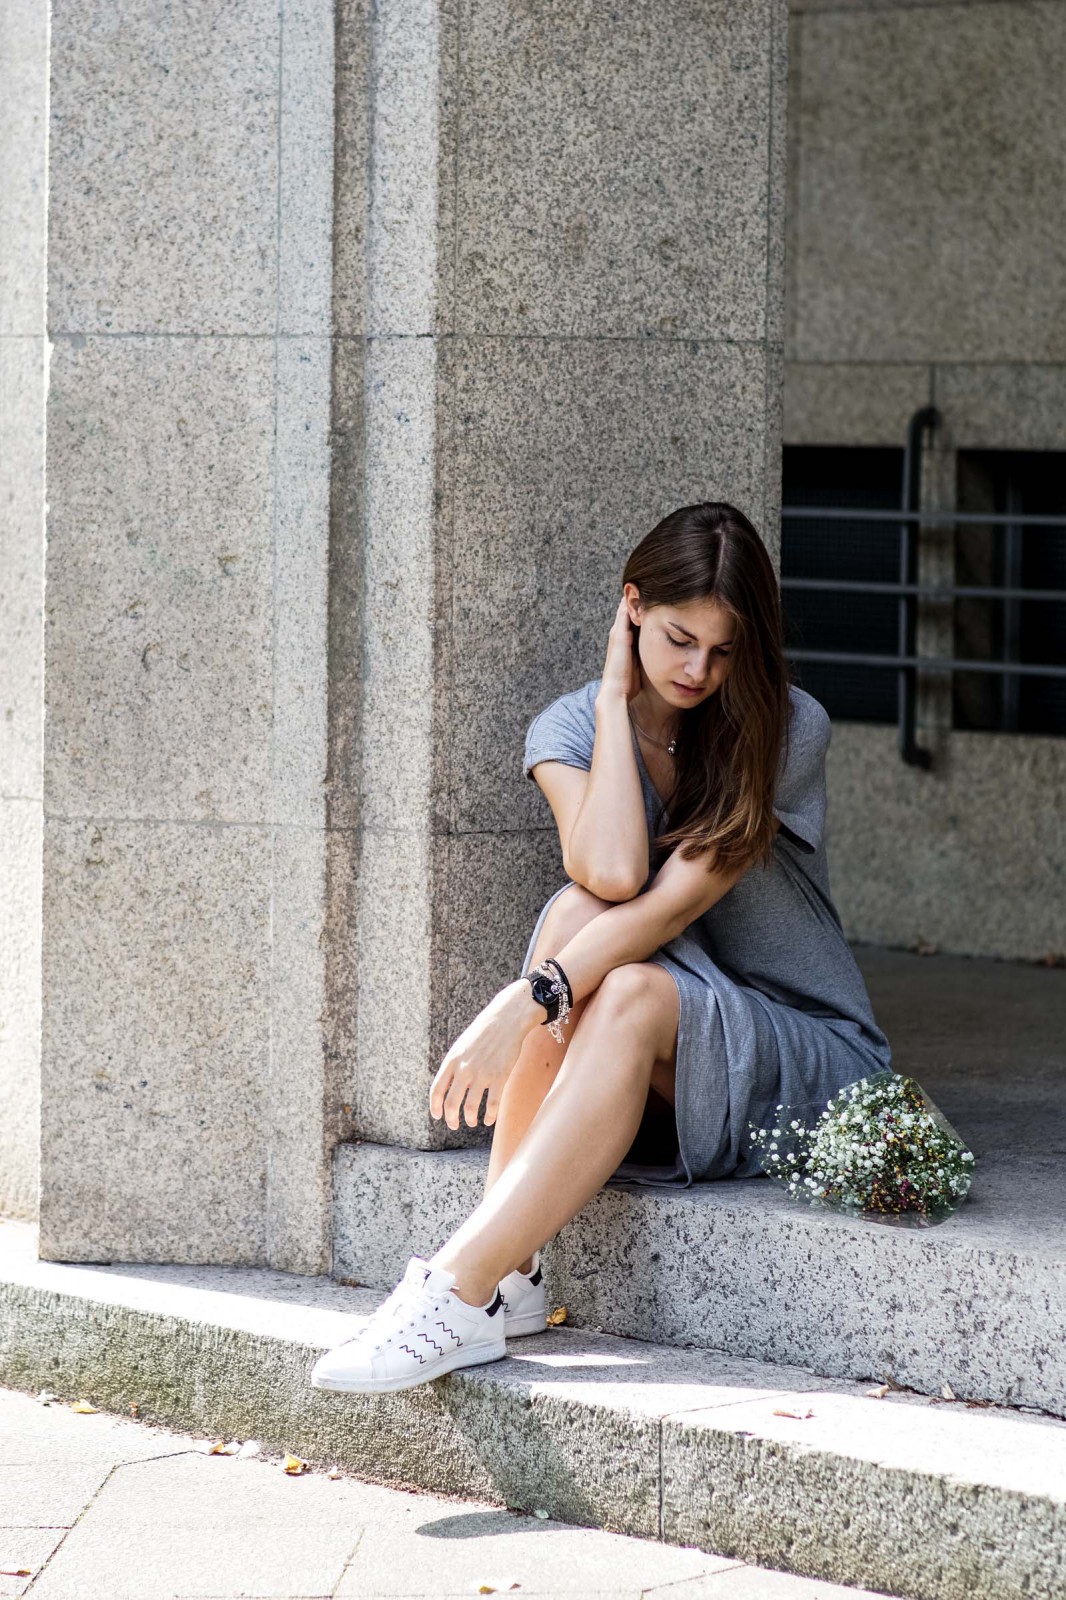 Grey Maxi Dress and White Sneakers